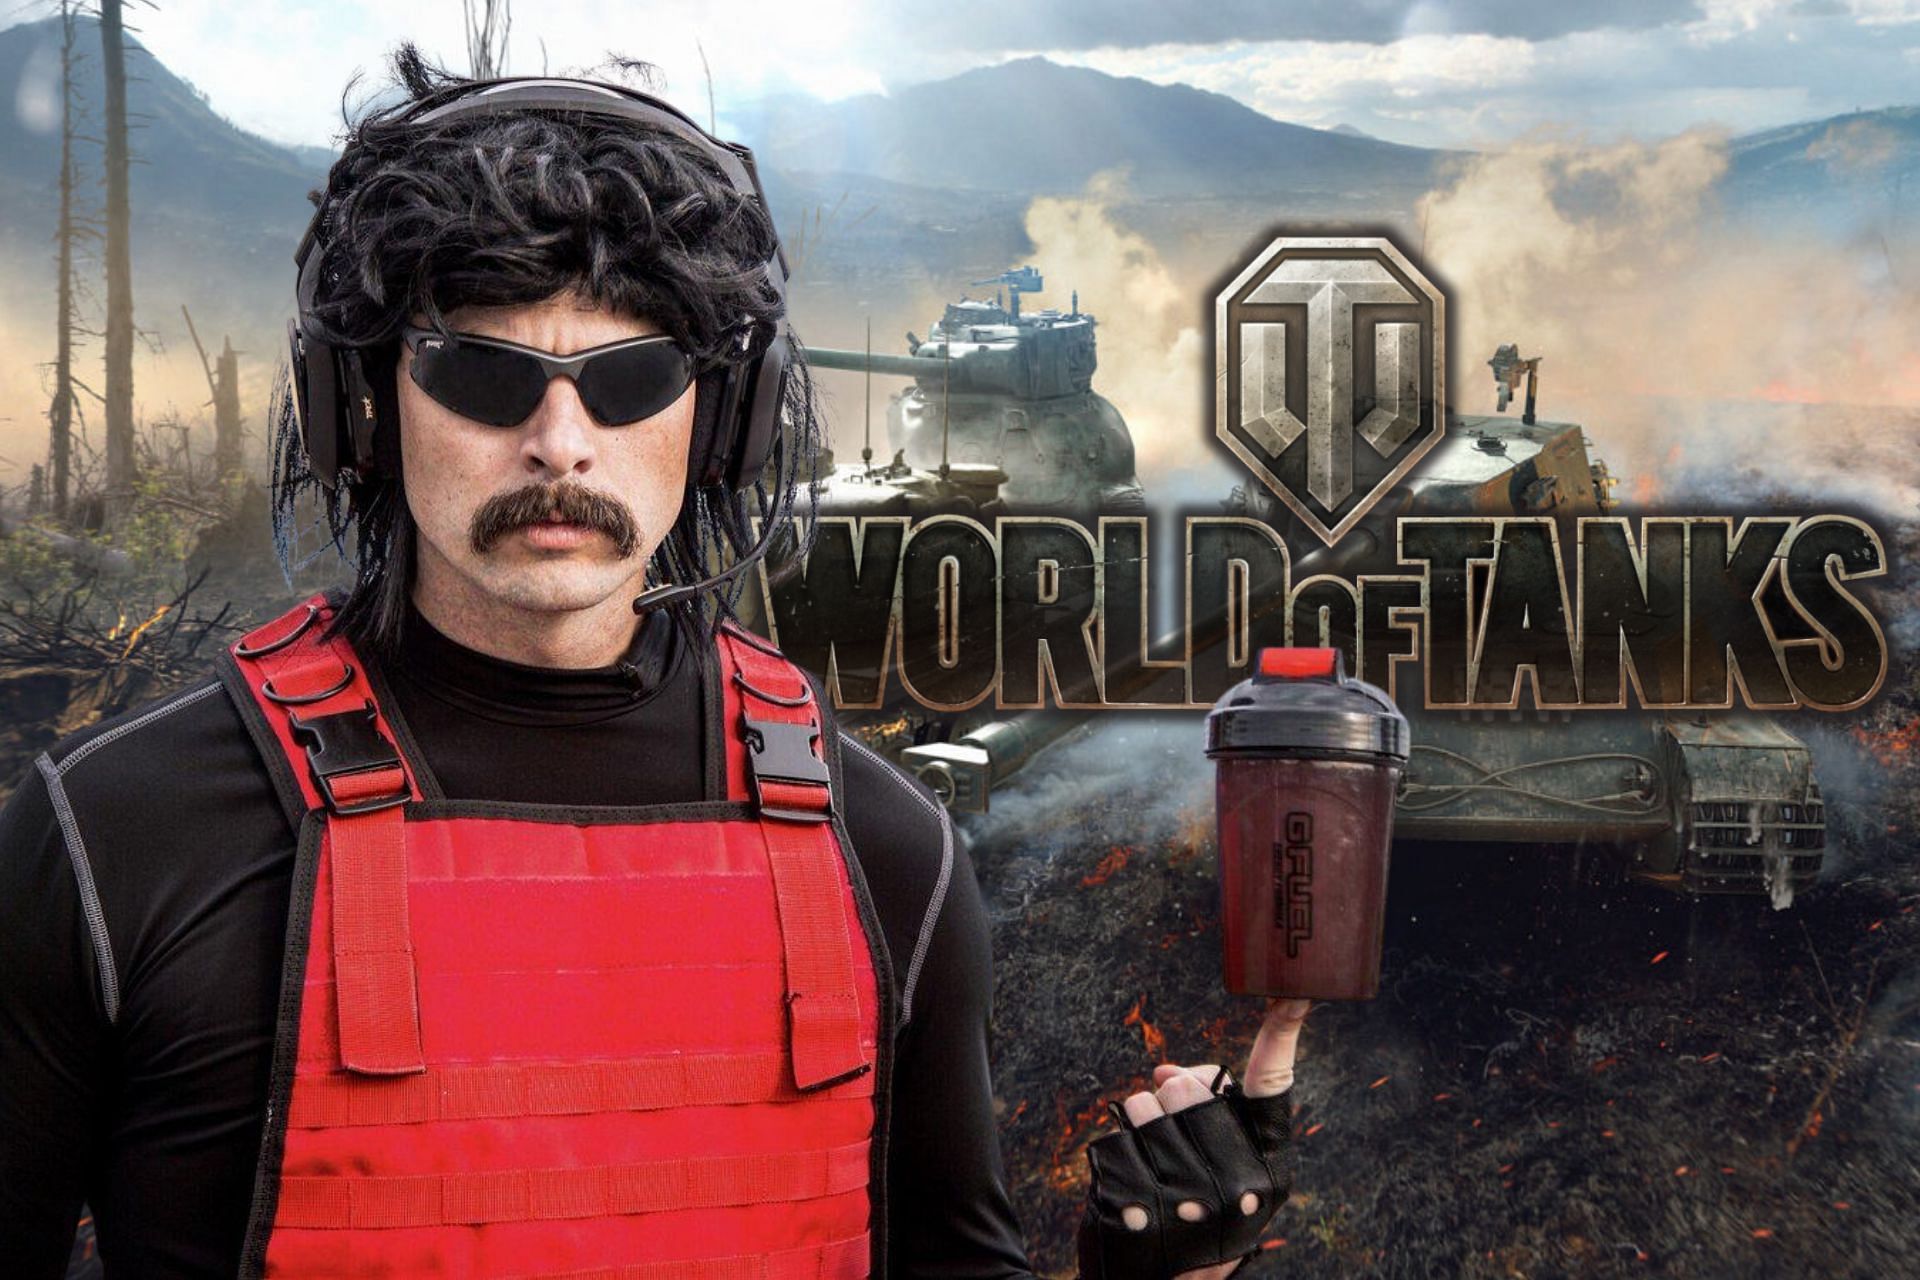 Wargaming made a huge announcement by teaming up with Dr DisRespect for World of Tanks Blitz's anniversary (Image via Sportskeeda)